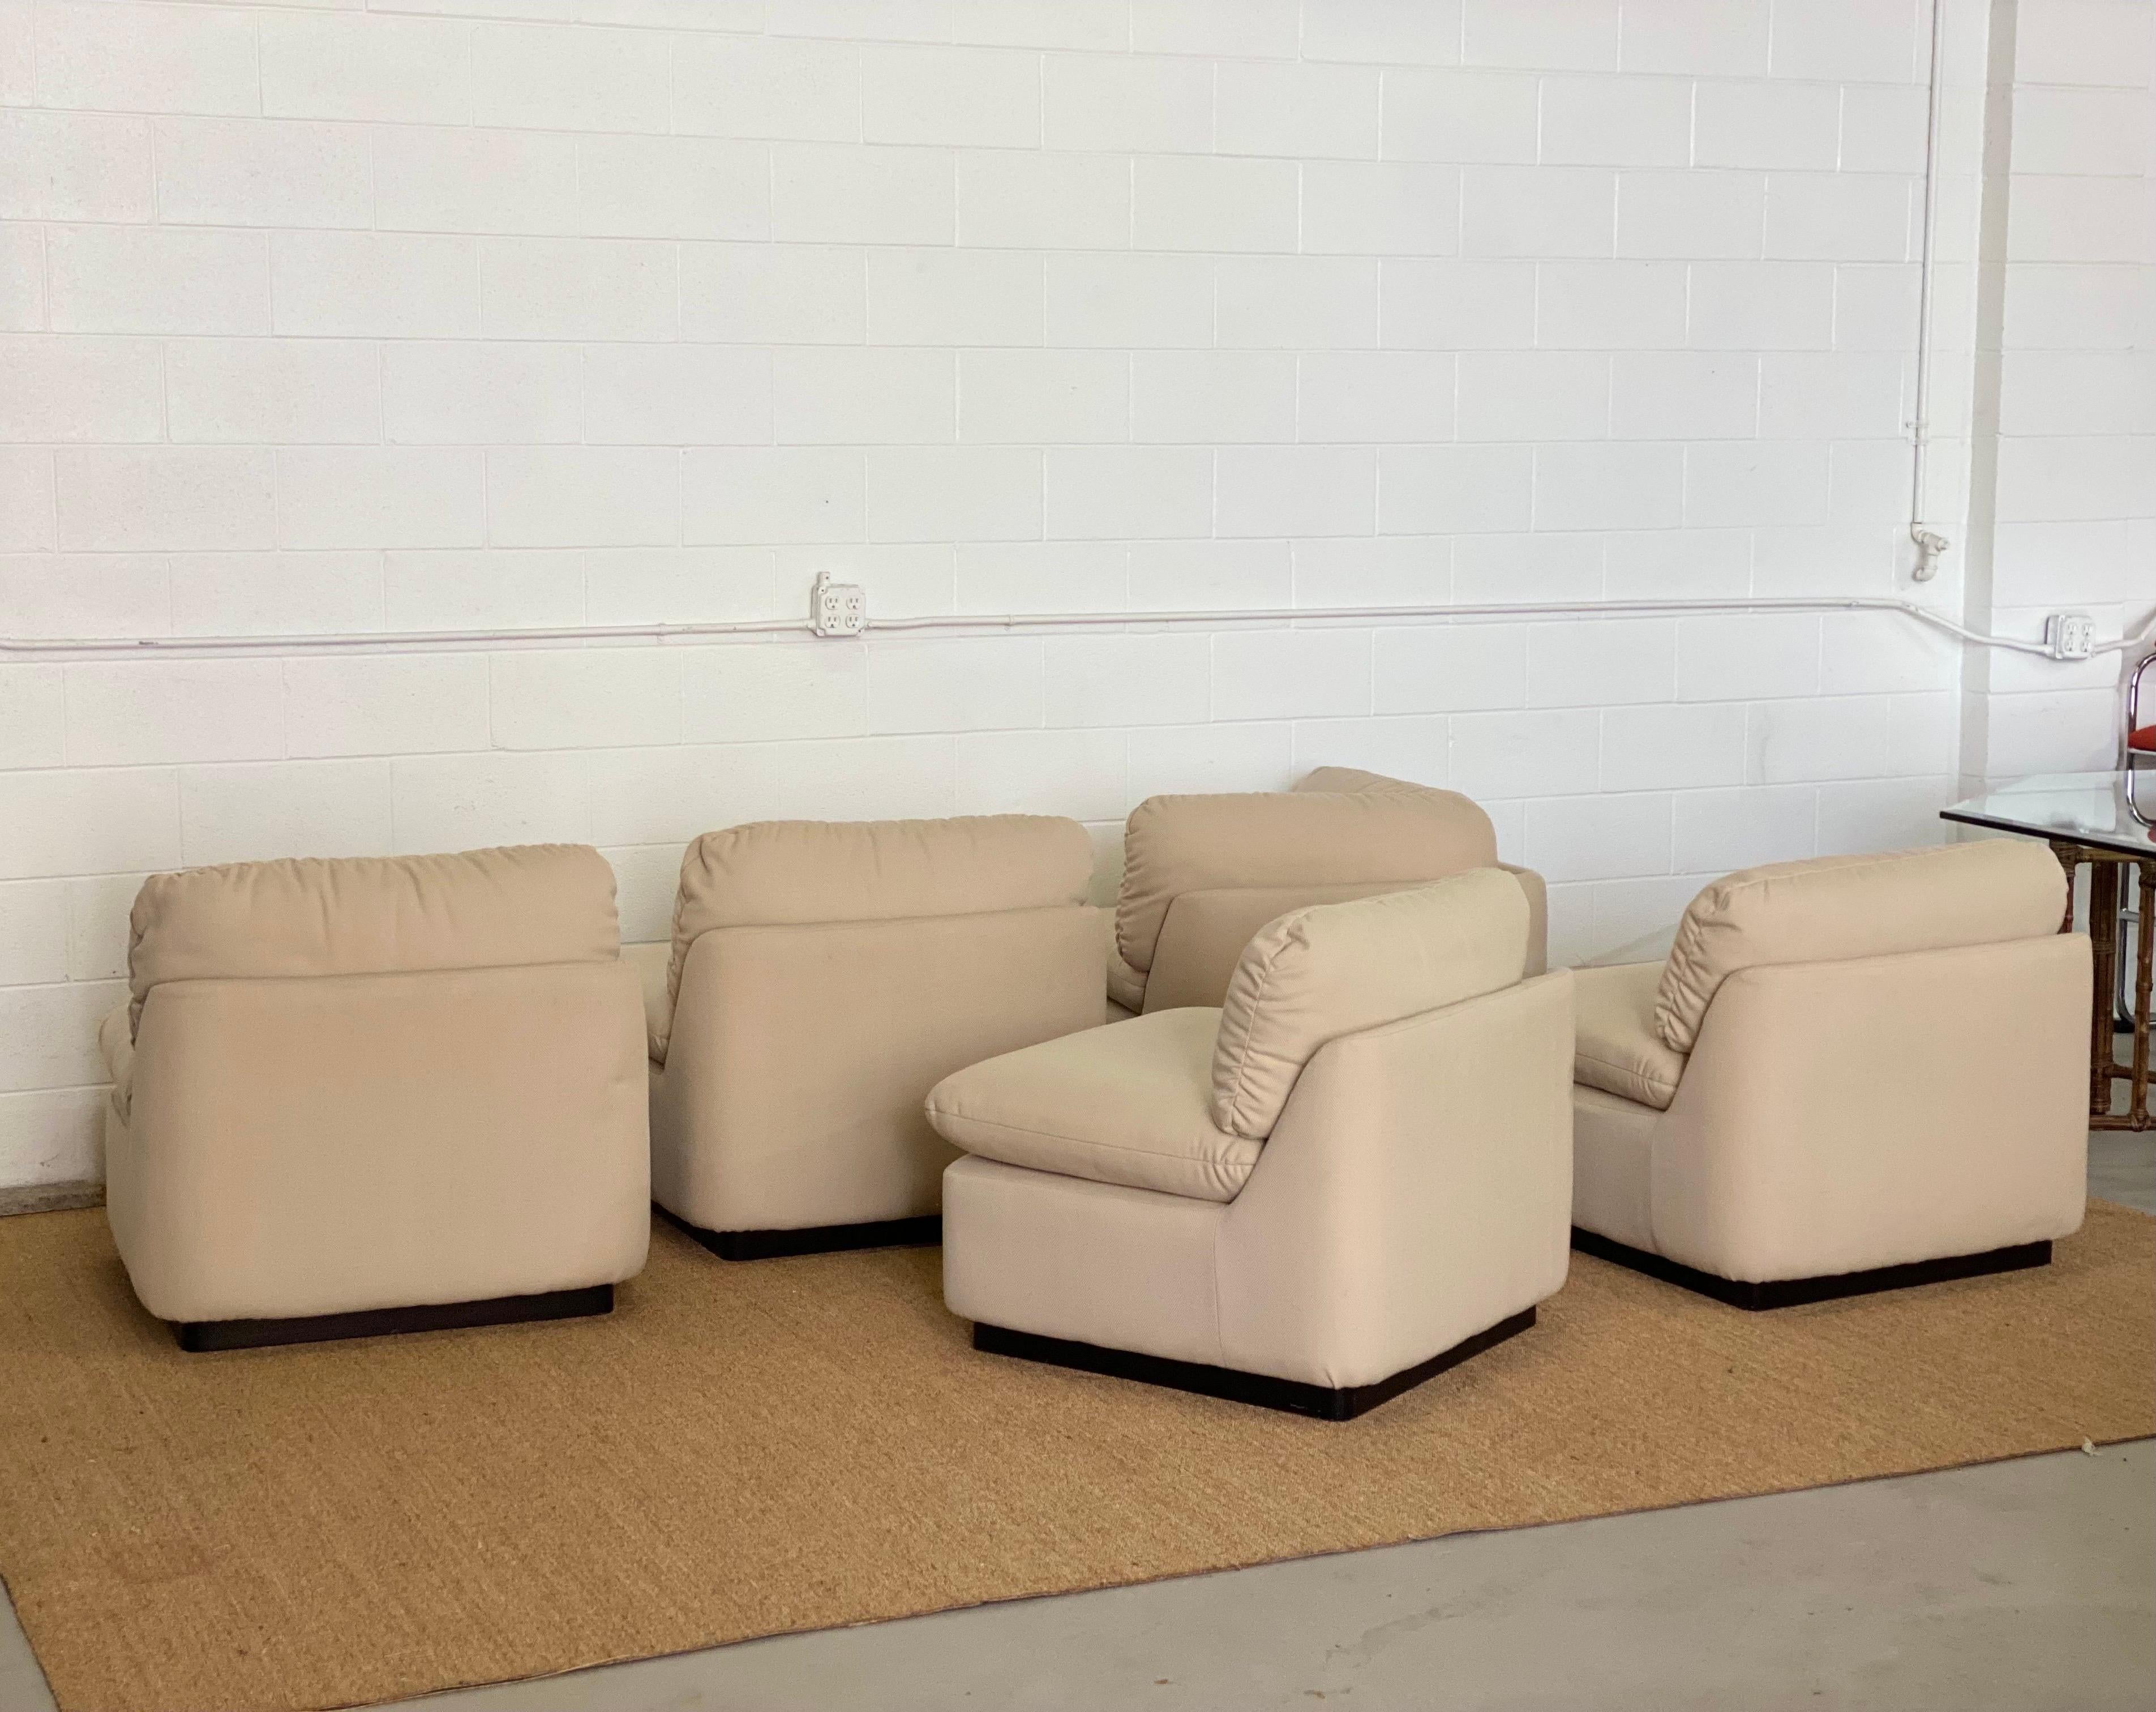 1990s Directional White Ivory Five Piece Modular Lounge Sectional – 5 Pieces In Good Condition For Sale In Farmington Hills, MI